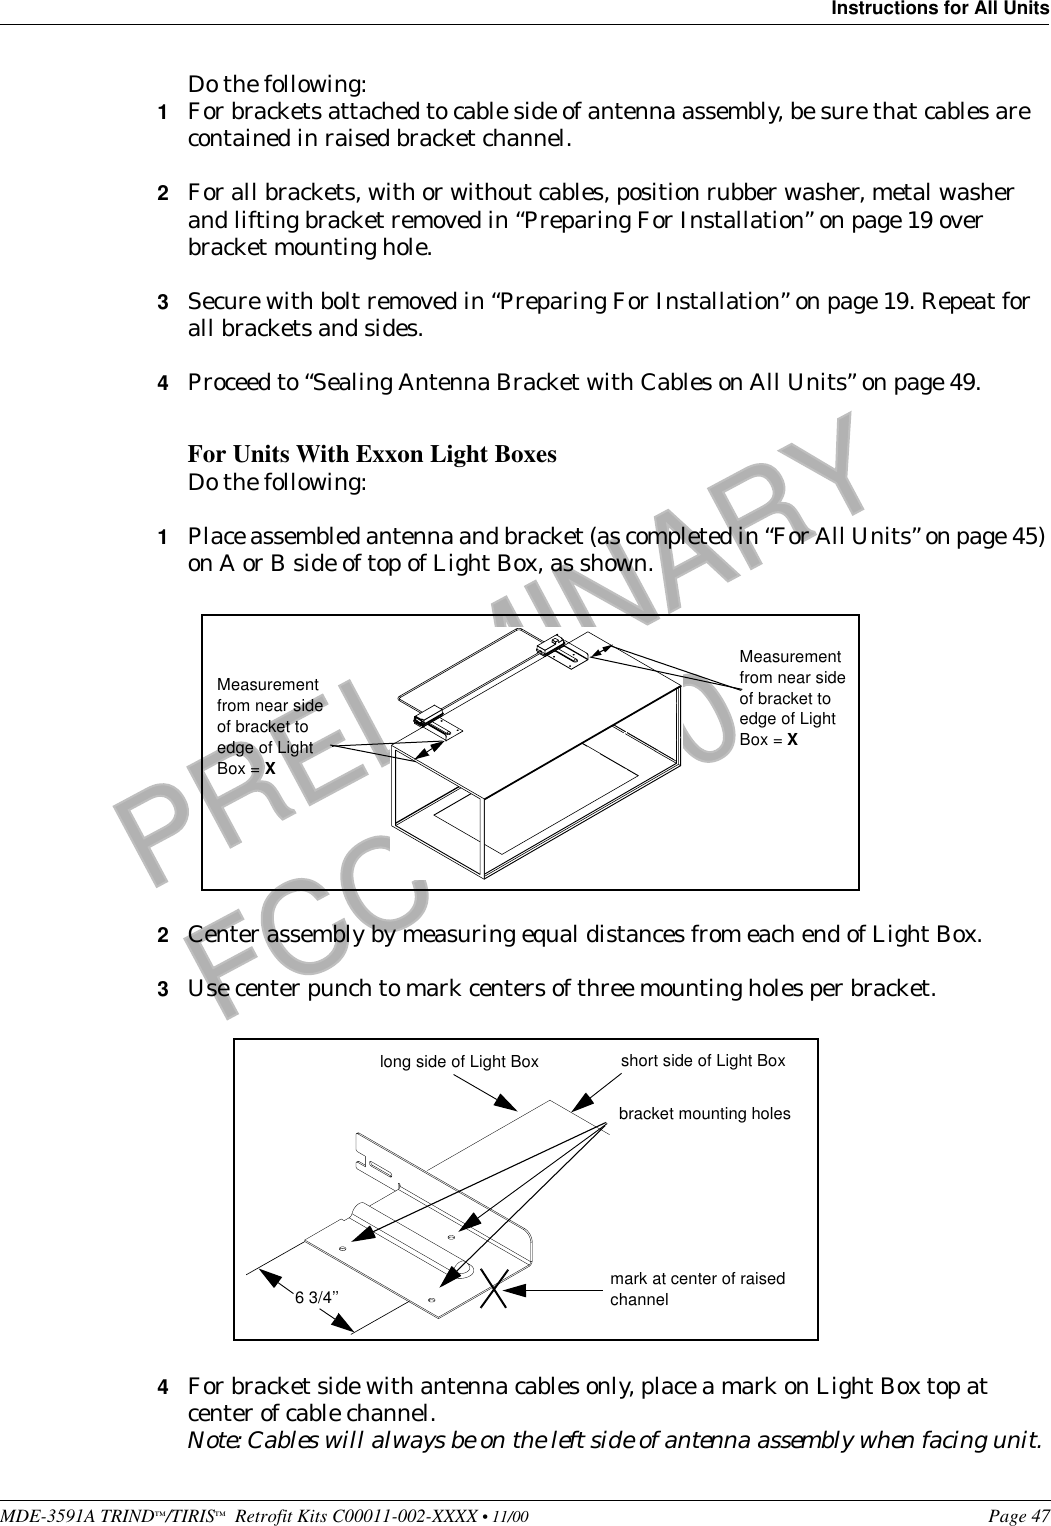 MDE-3591A TRIND™/TIRIS™  Retrofit Kits C00011-002-XXXX • 11/00 Page 47Instructions for All UnitsPRELIMINARYFCC 11/30Do the following:1For brackets attached to cable side of antenna assembly, be sure that cables are contained in raised bracket channel.2For all brackets, with or without cables, position rubber washer, metal washer and lifting bracket removed in “Preparing For Installation” on page 19 over bracket mounting hole.3Secure with bolt removed in “Preparing For Installation” on page 19. Repeat for all brackets and sides.4Proceed to “Sealing Antenna Bracket with Cables on All Units” on page 49.For Units With Exxon Light BoxesDo the following:1Place assembled antenna and bracket (as completed in “For All Units” on page 45) on A or B side of top of Light Box, as shown.2Center assembly by measuring equal distances from each end of Light Box.3Use center punch to mark centers of three mounting holes per bracket.4For bracket side with antenna cables only, place a mark on Light Box top at center of cable channel.Note: Cables will always be on the left side of antenna assembly when facing unit.Measurement from near side of bracket to edge of Light Box = XMeasurement from near side of bracket to edge of Light Box = Xbracket mounting holesmark at center of raised channellong side of Light Box short side of Light Box6 3/4’’